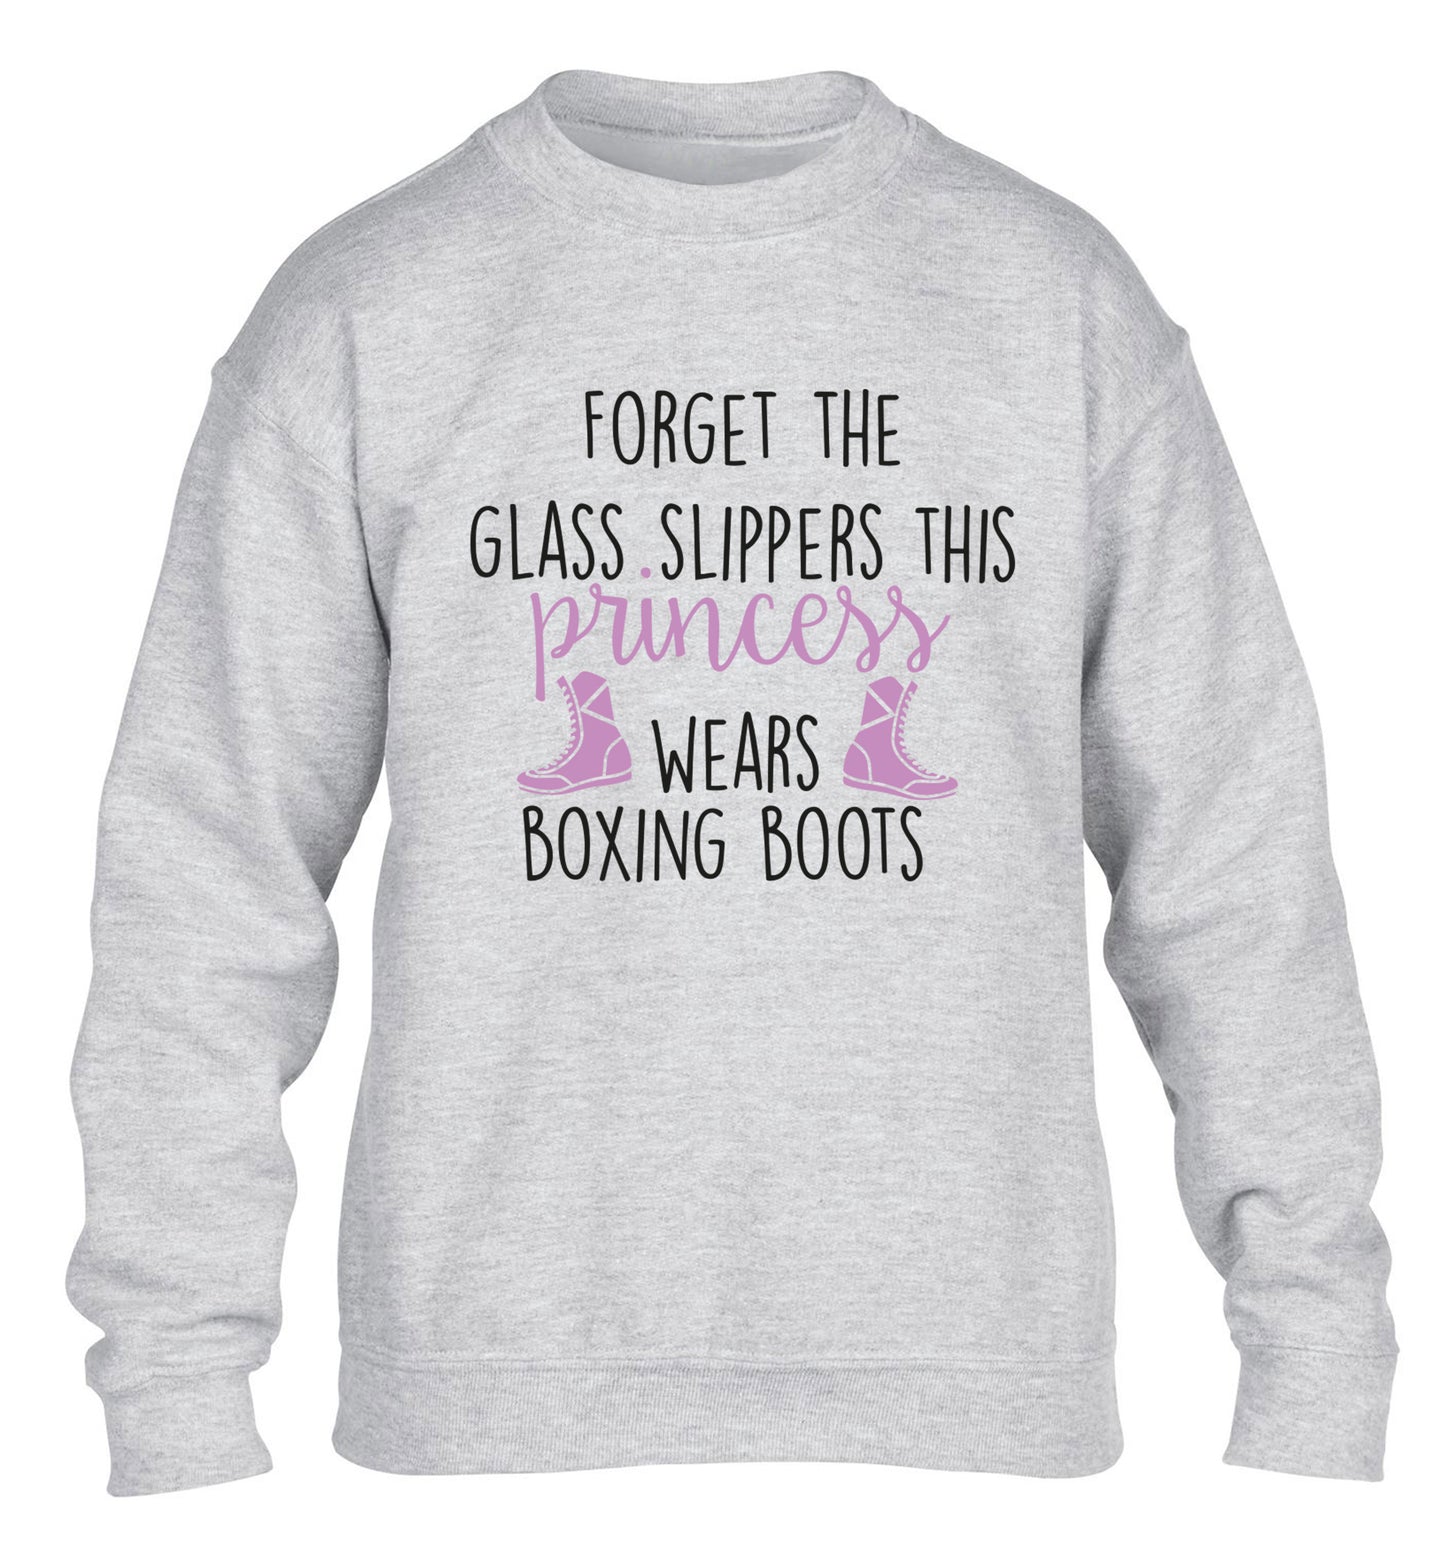 Forget the glass slippers this princess wears boxing boots children's grey sweater 12-14 Years